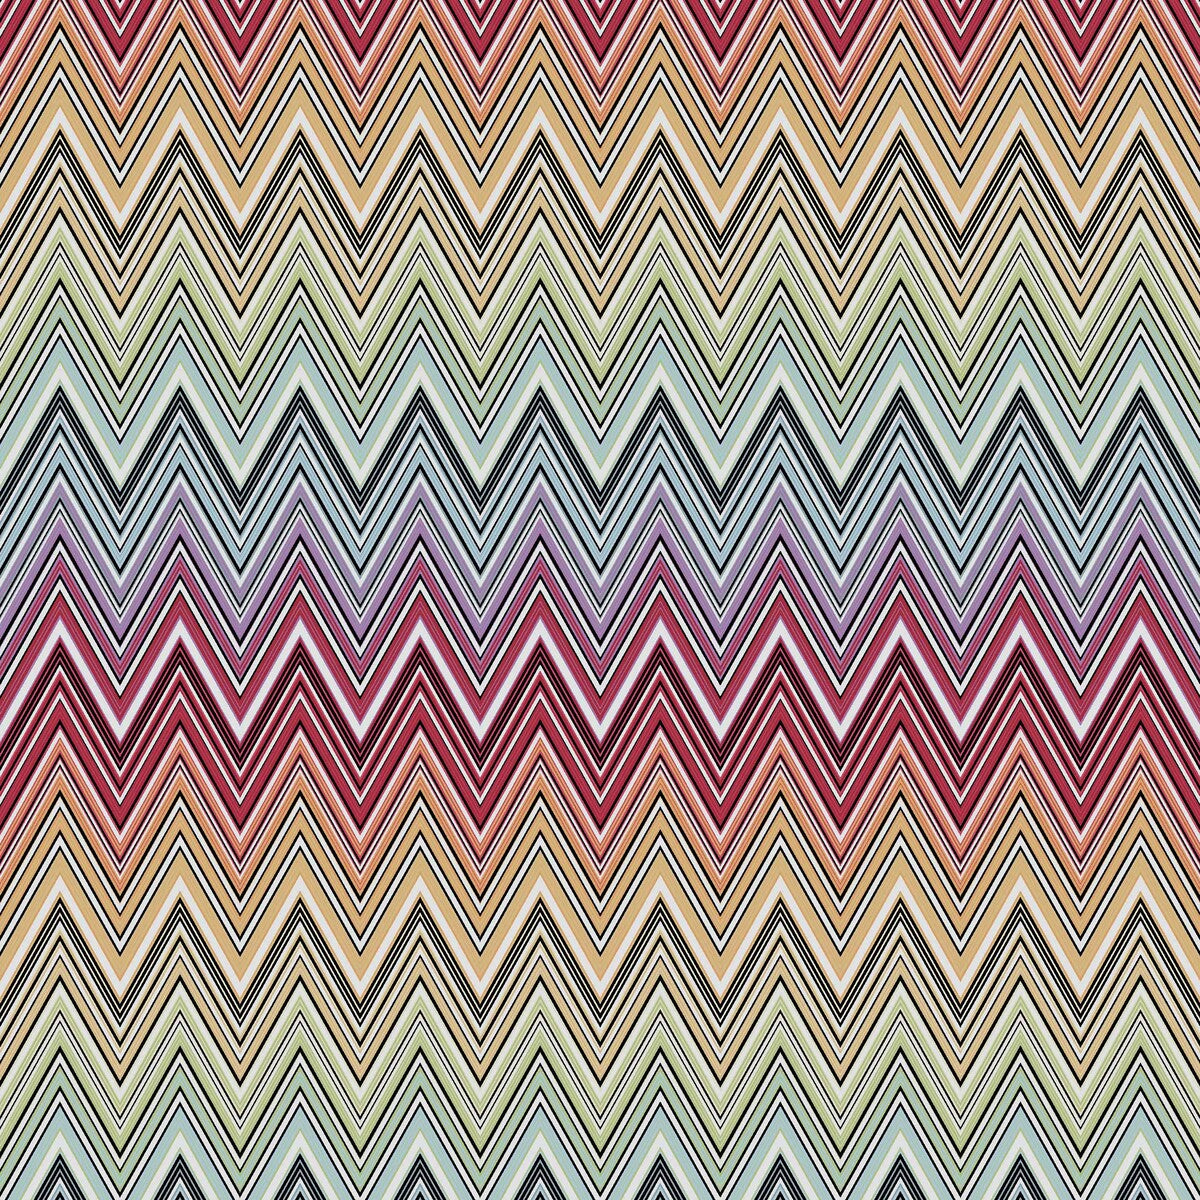 Kew Mtc Outdoor fabric in 159 color - pattern 36164.1512.0 - by Kravet Couture in the Missoni Home collection